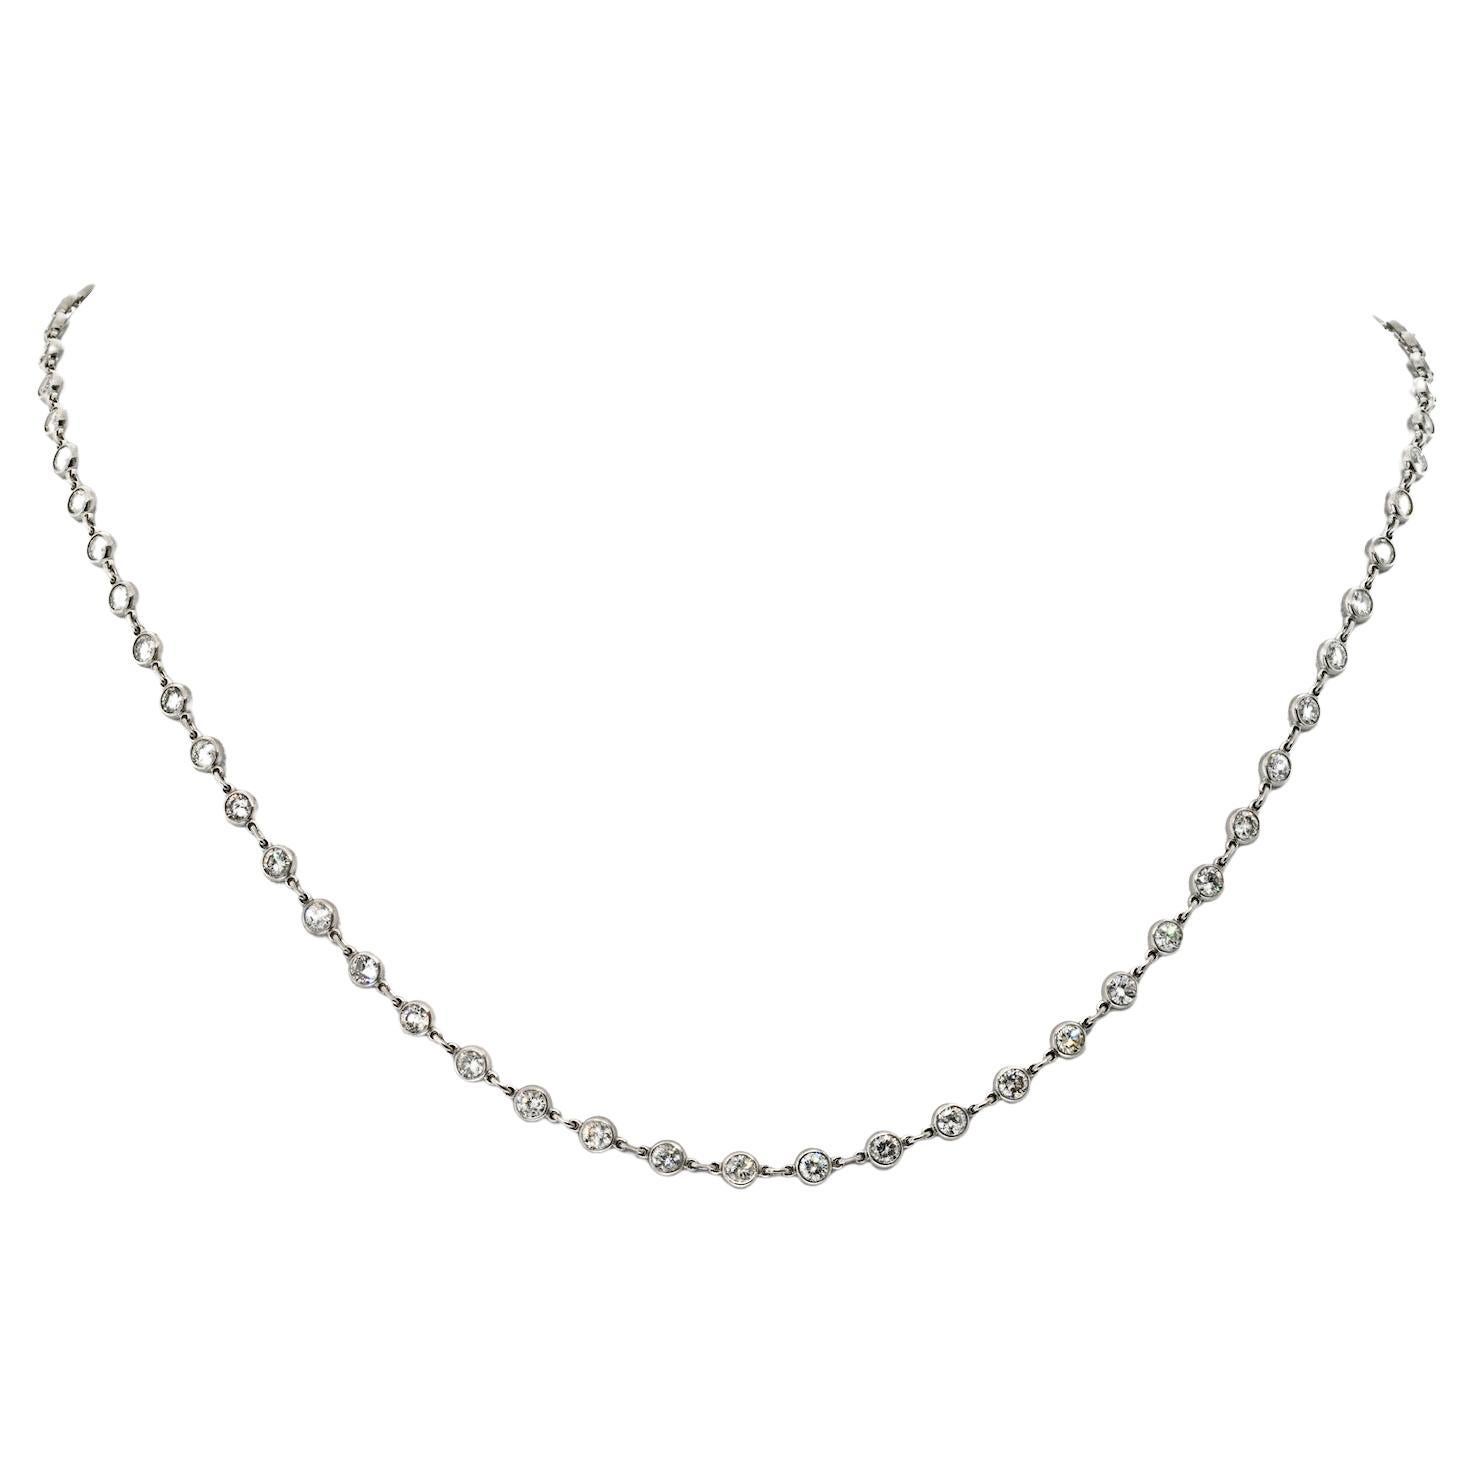 18K White Gold 6.17cttw Diamond By The Yard 16 Inch Chain Necklace For Sale